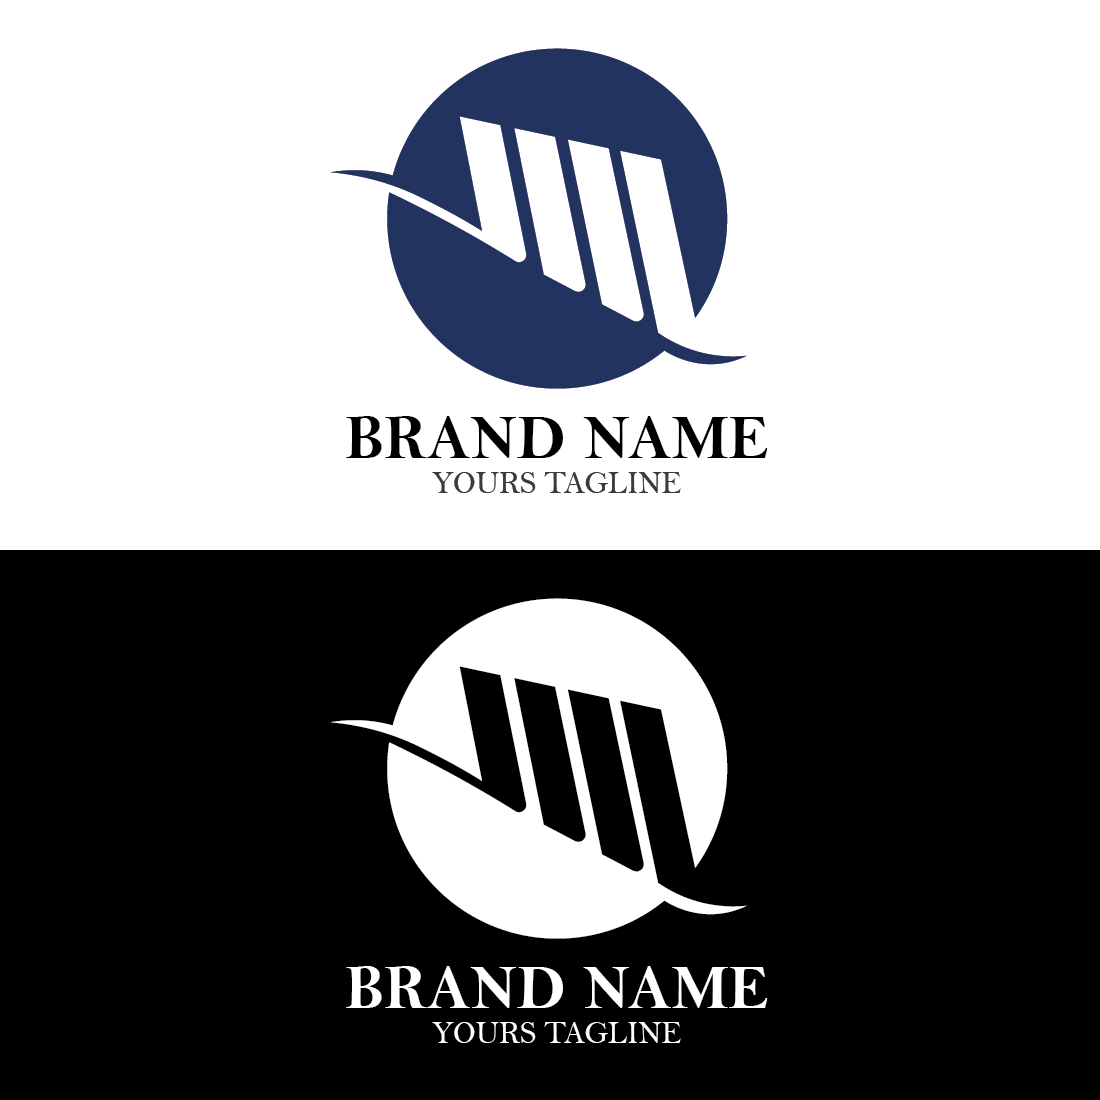 new and unique brand logo design || professional success logo design template for your company, brand and businesses preview image.